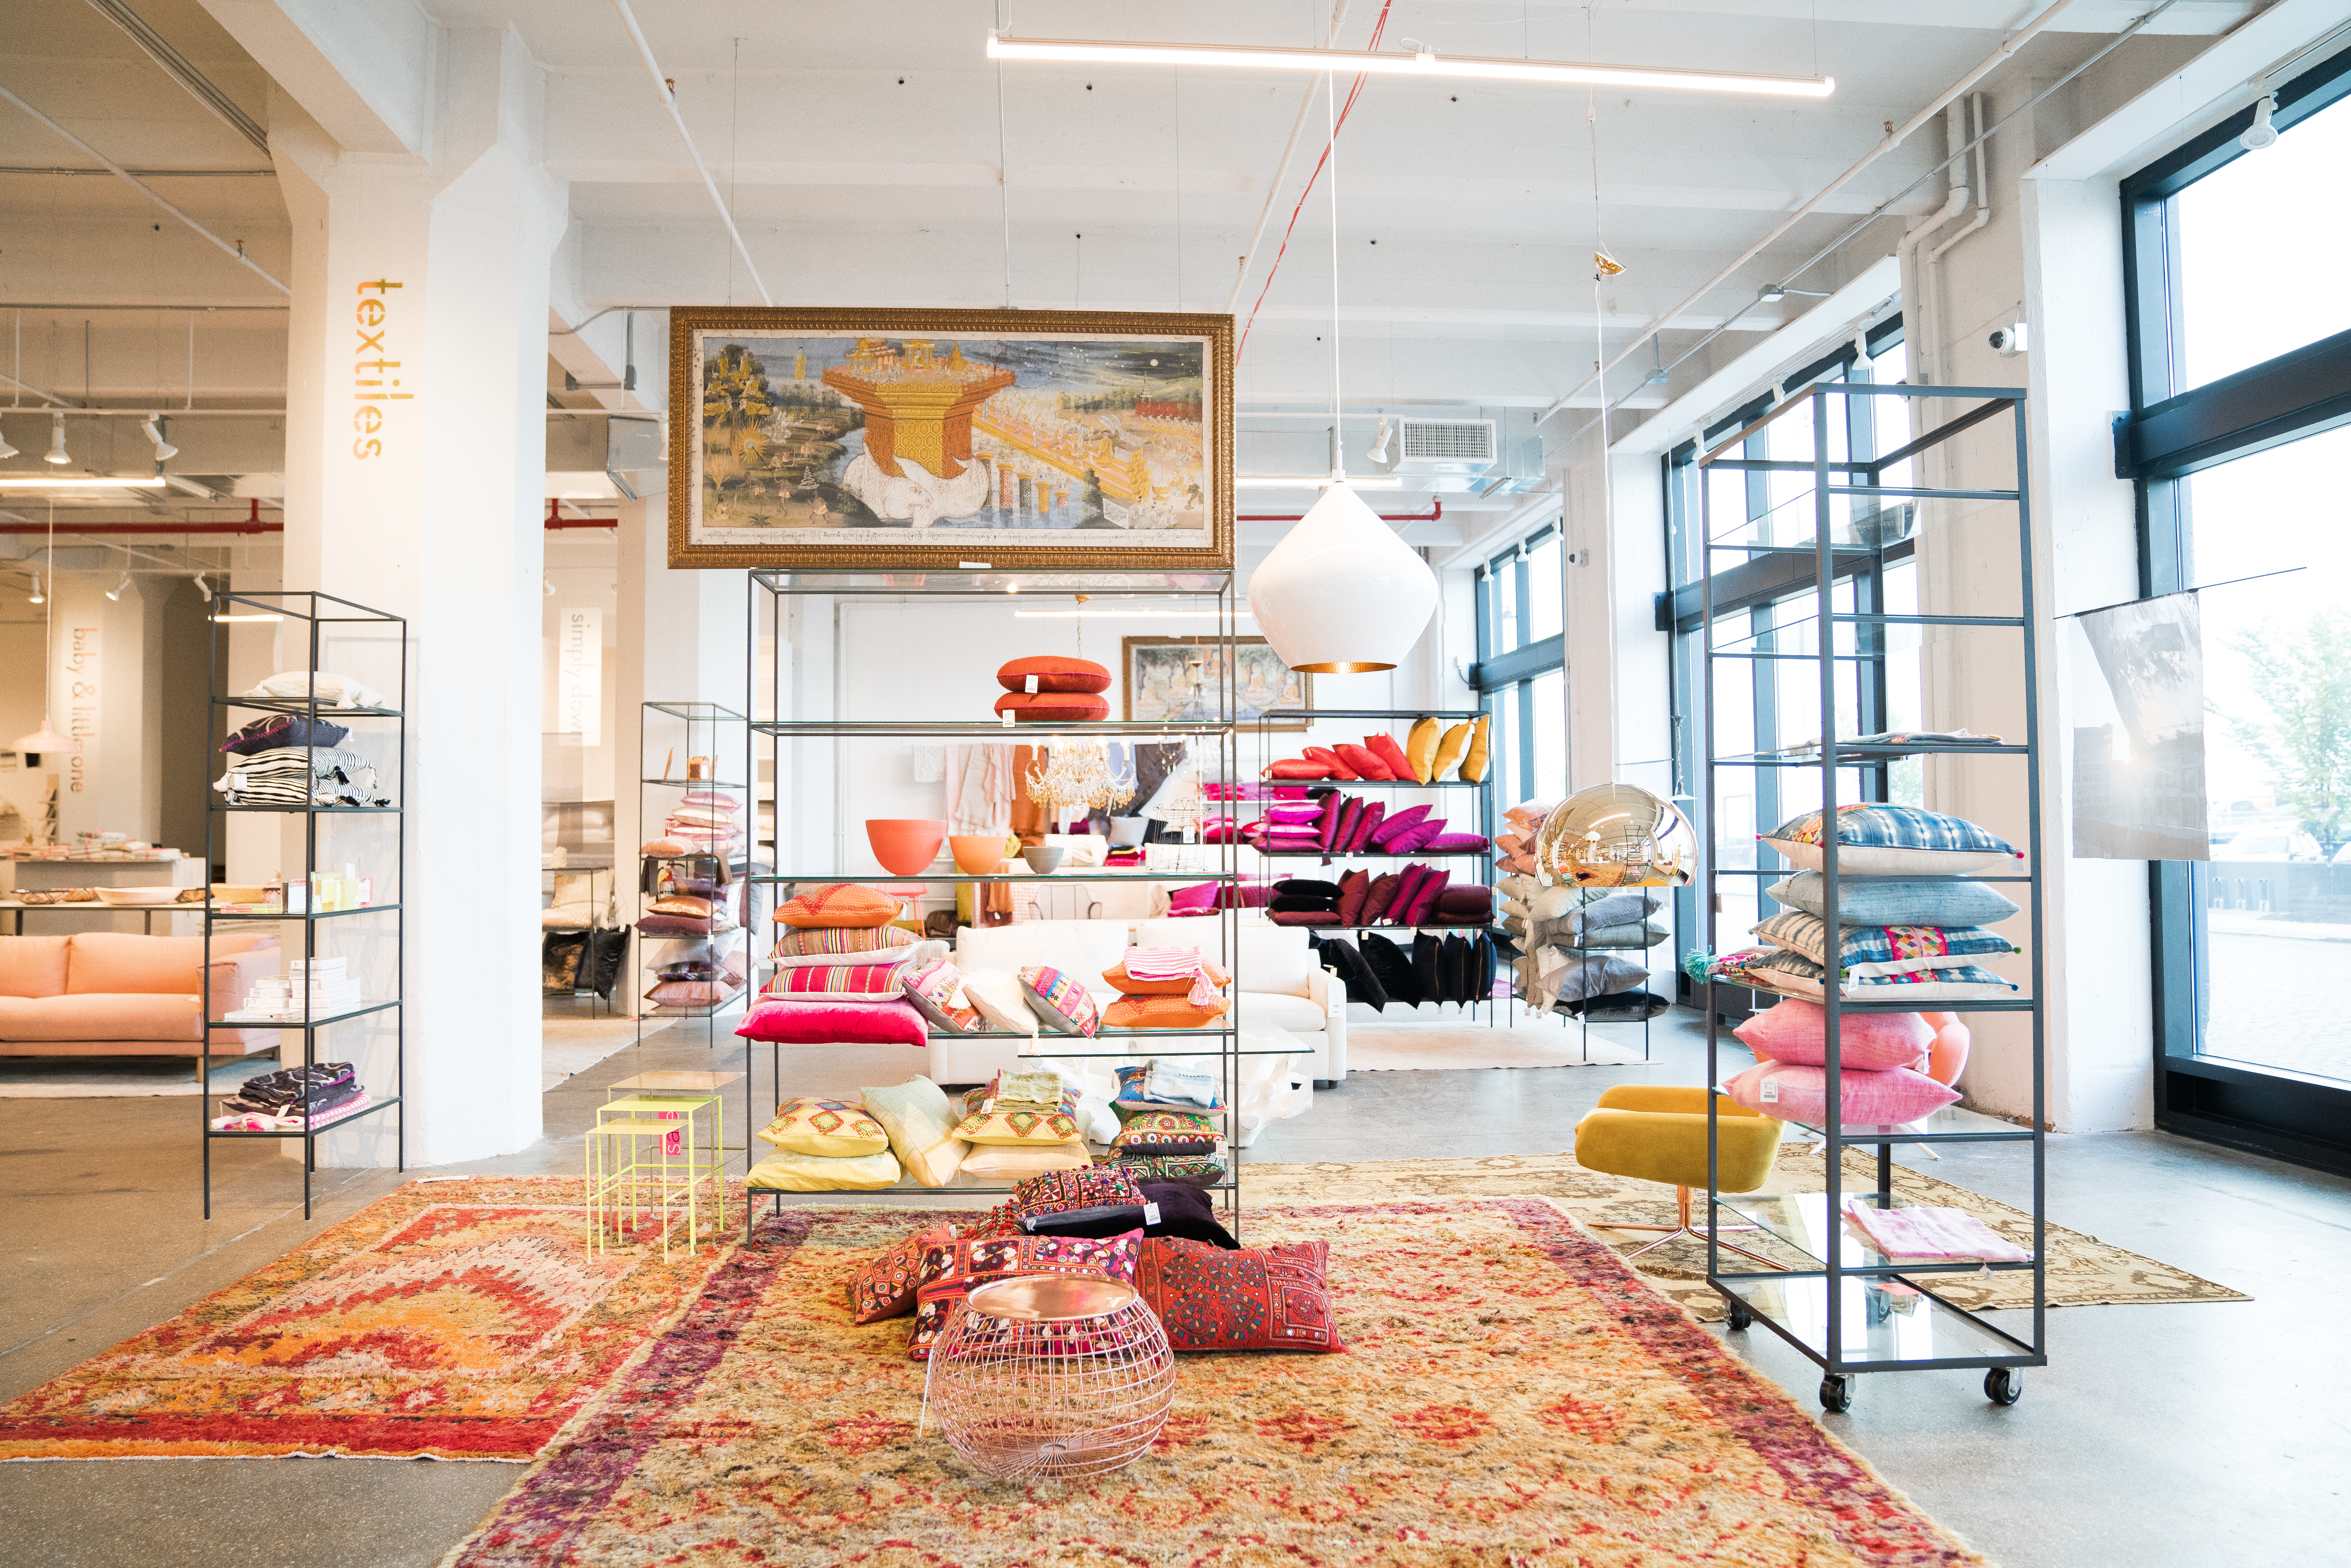 Pillows are on shelves and rugs are on the ground in a shop.